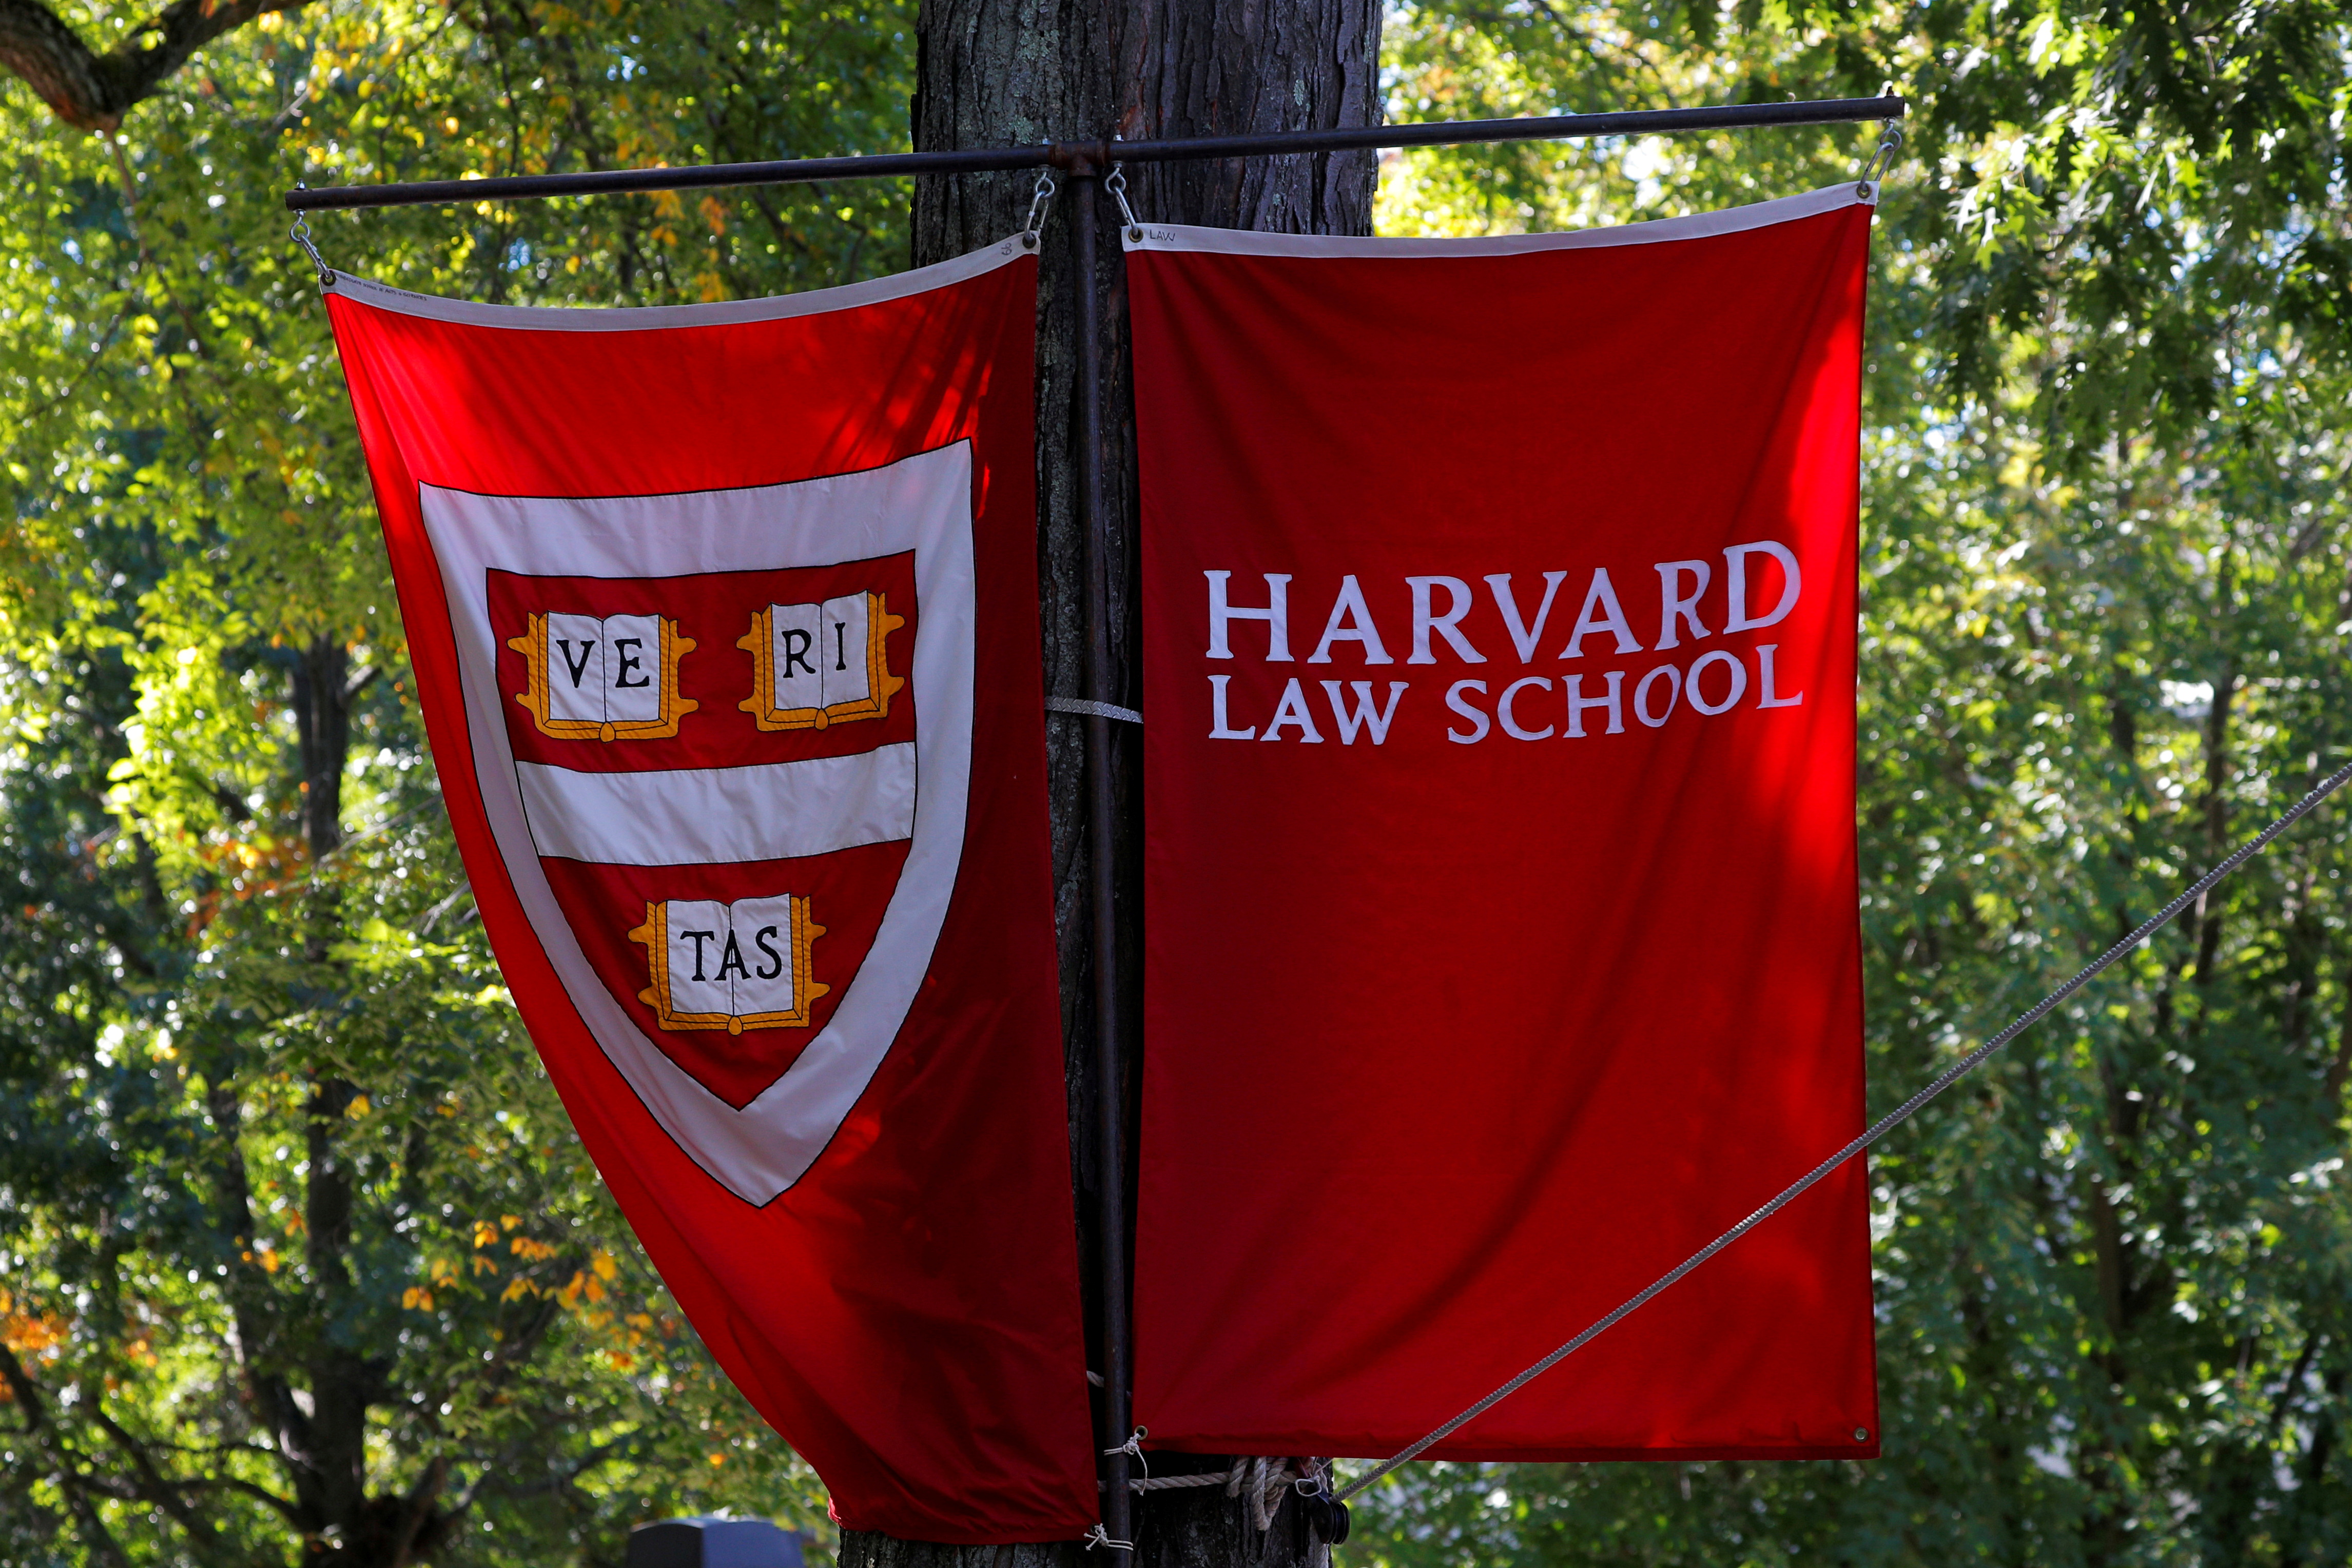 FILE PHOTO: Banners for Harvard Law School fly during the inauguration of Lawrence Bacow as the 29th President of Harvard University in Cambridge